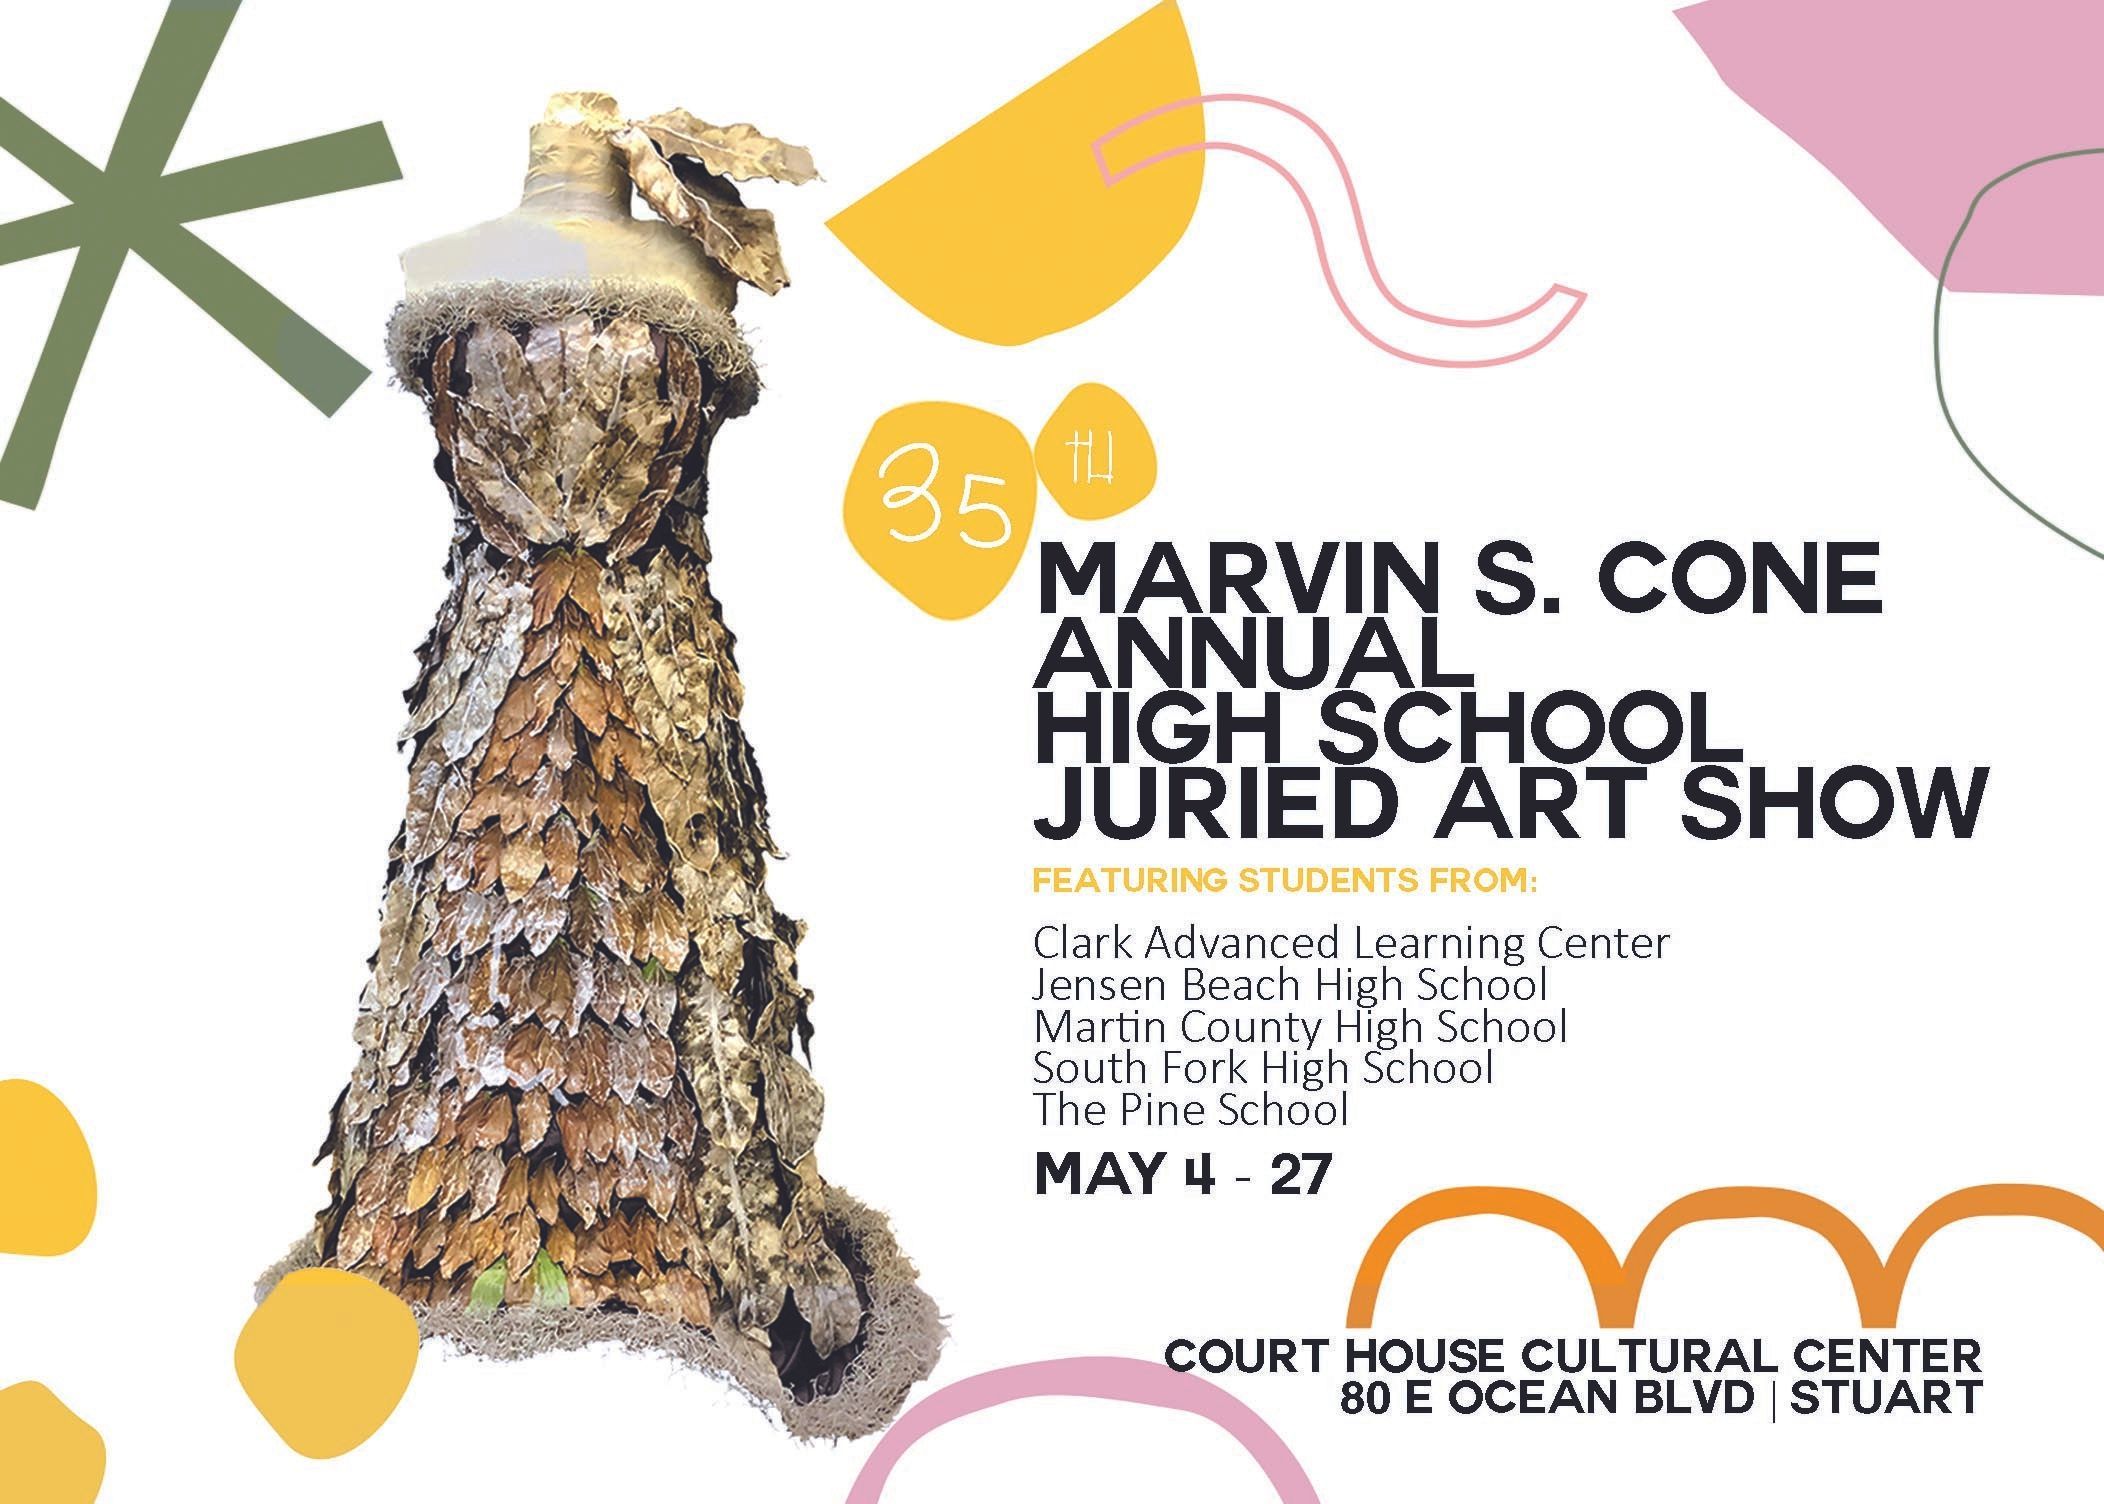 Marvin S. Cone 35th Annual High School Juried Art Show